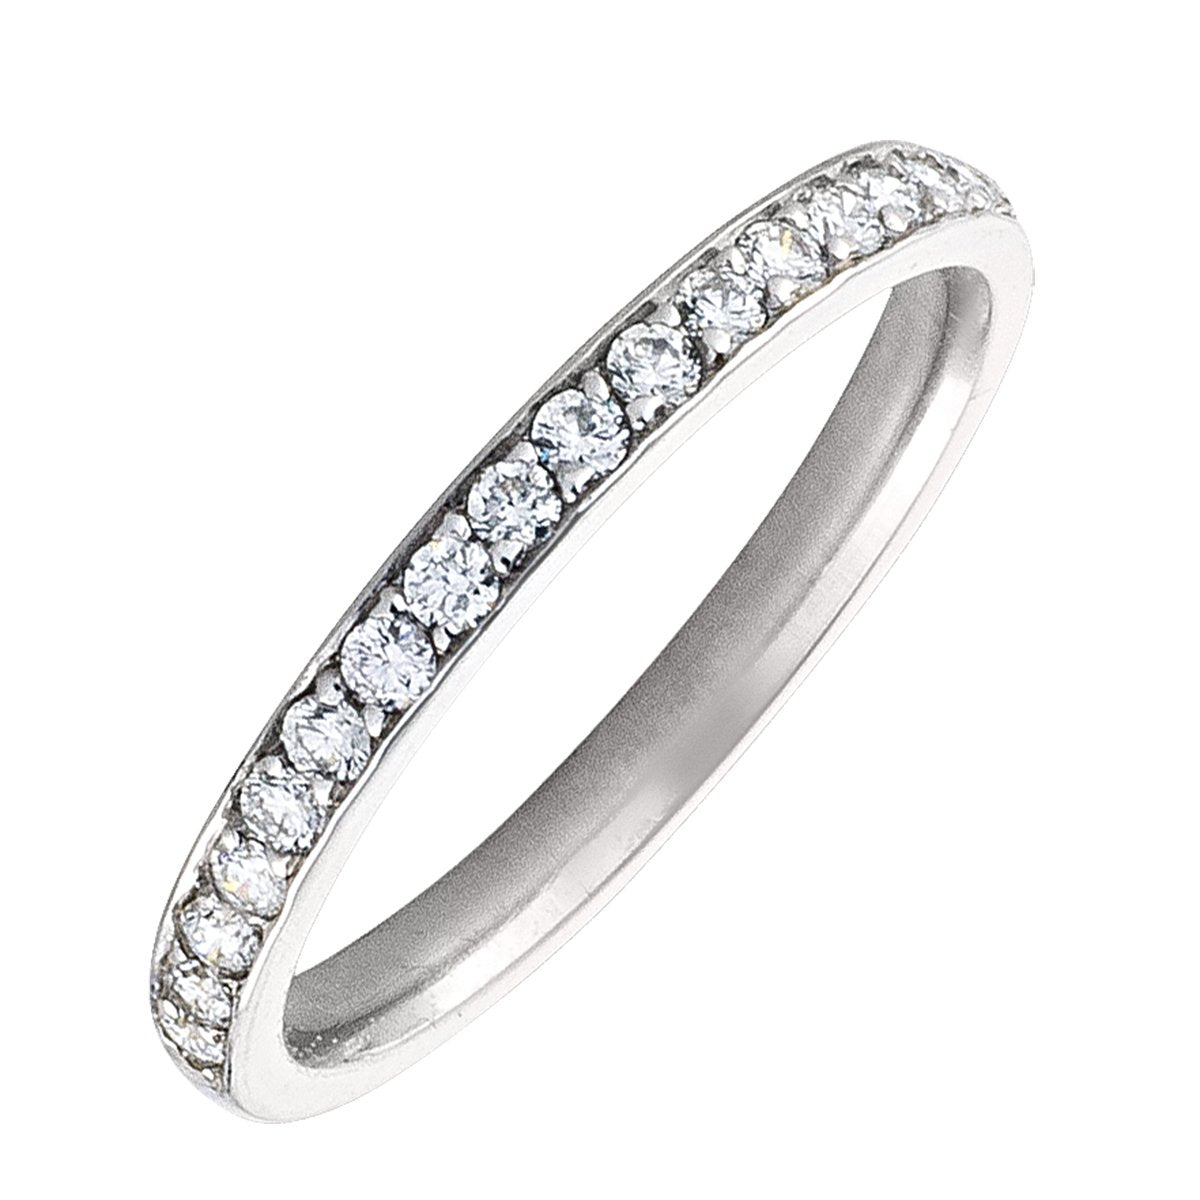 DIAMOND RINGS WHITE GOLD DIAMOND PAVE HALF ETERNITY BAND (AVAILABE IN VARIOUS STONE AND SIZE).